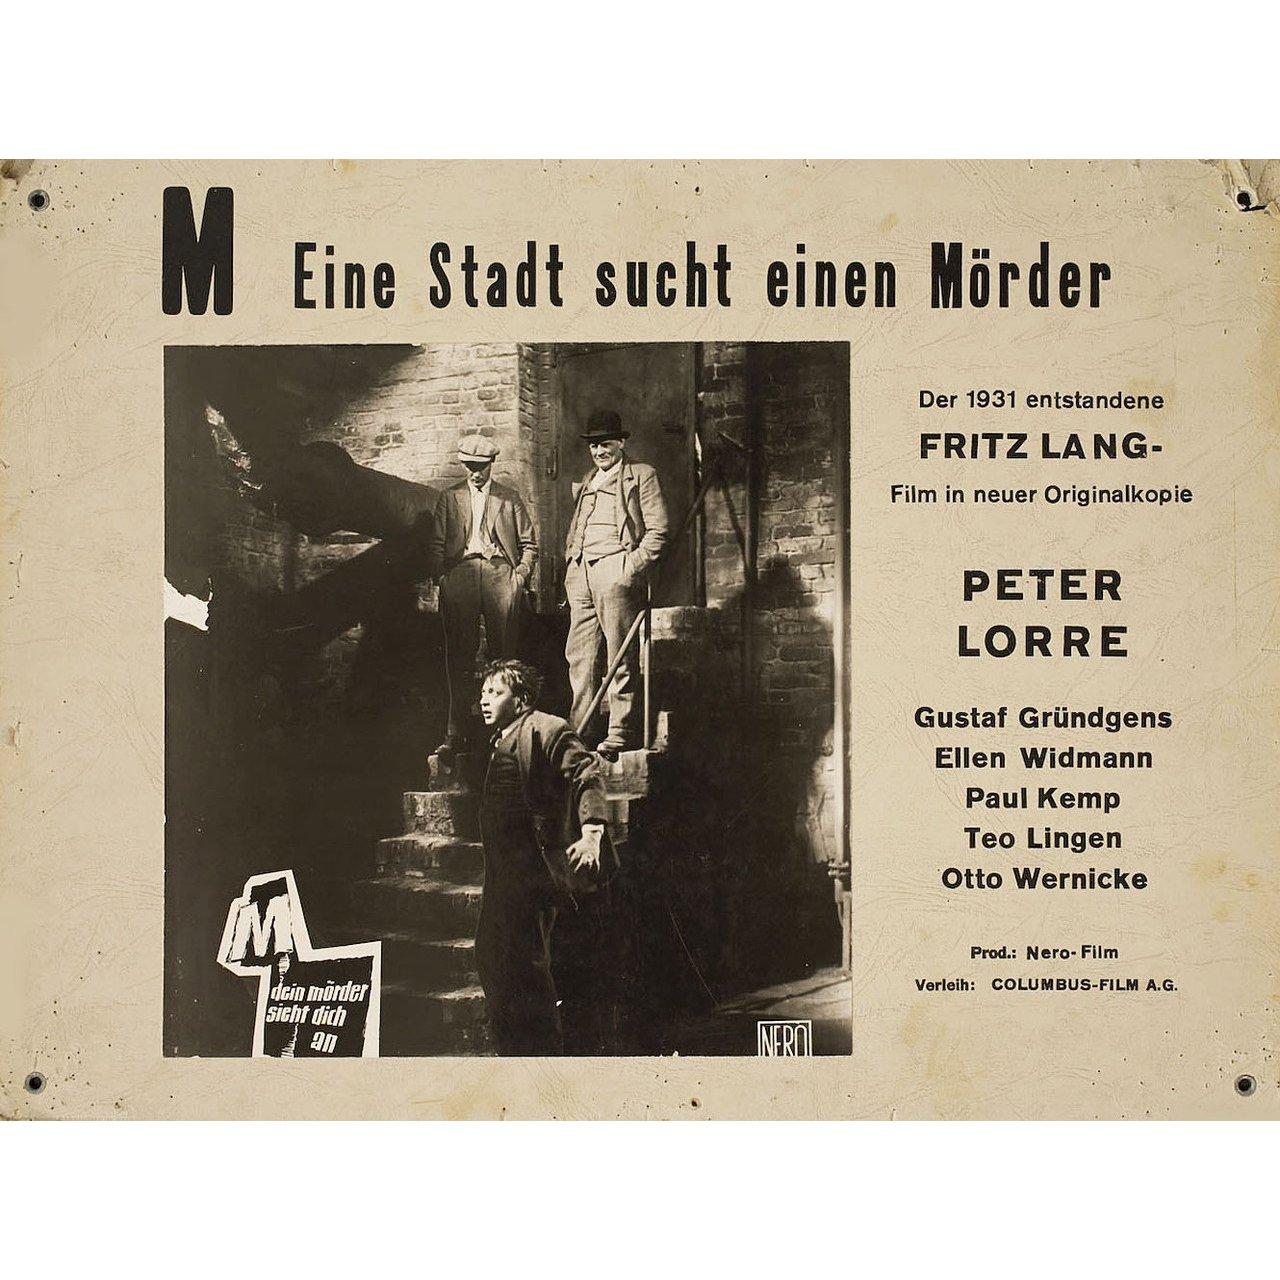 Original 1950s Swiss scene card for the 1931 film M directed by Fritz Lang with Peter Lorre / Ellen Widmann / Inge Landgut / Otto Wernicke. Very Good condition. Please note: the size is stated in inches and the actual size can vary by an inch or